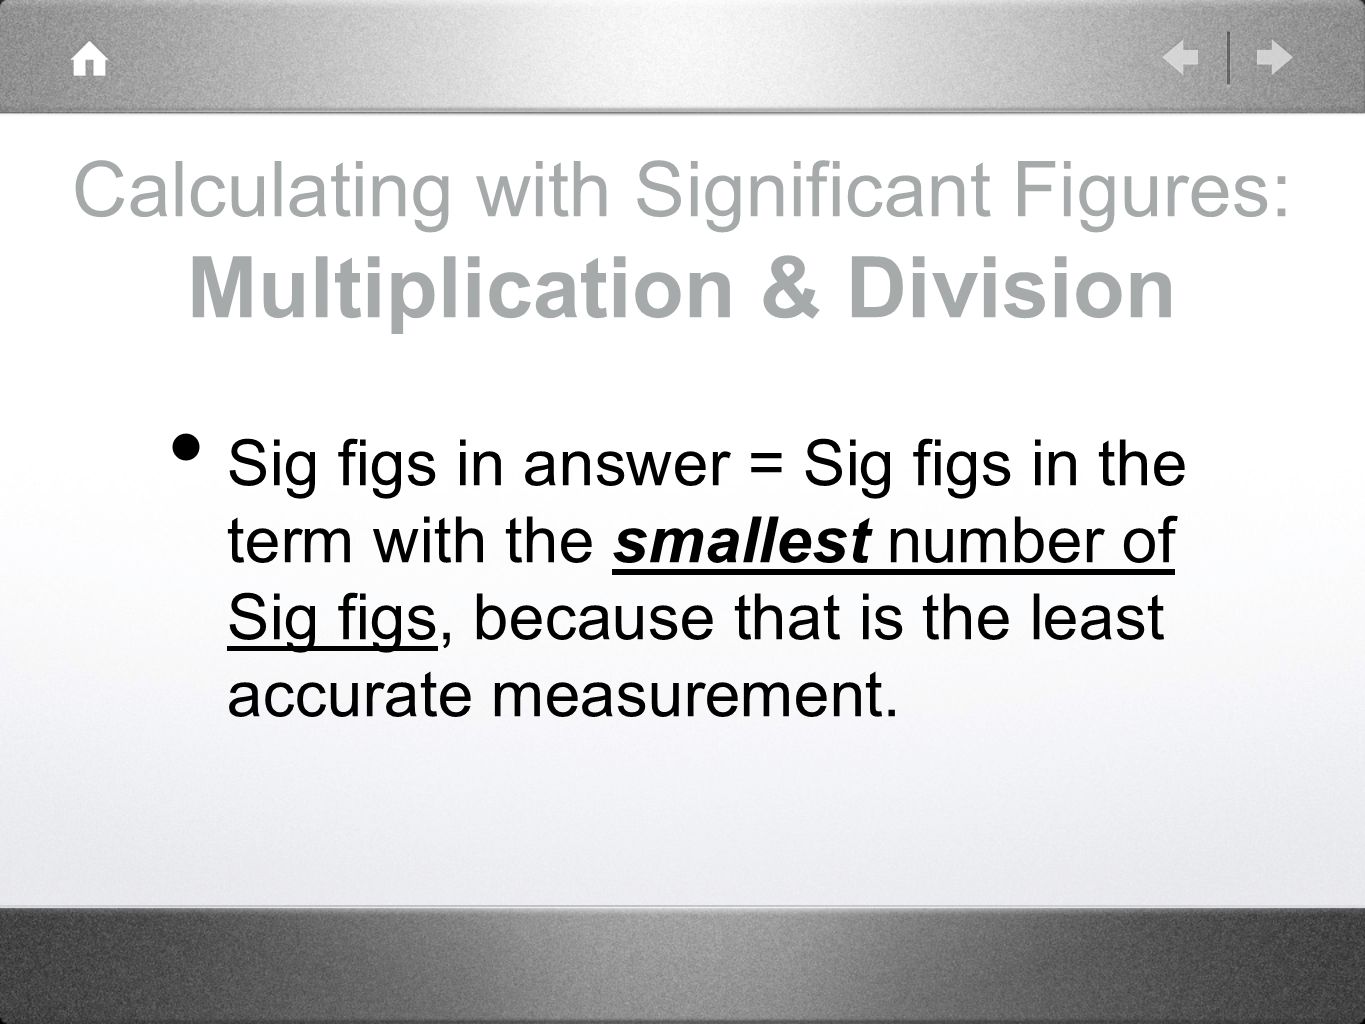 Calculating with Significant Figures: Multiplication & Division Sig figs in answer = Sig figs in the term with the smallest number of Sig figs, because that is the least accurate measurement.